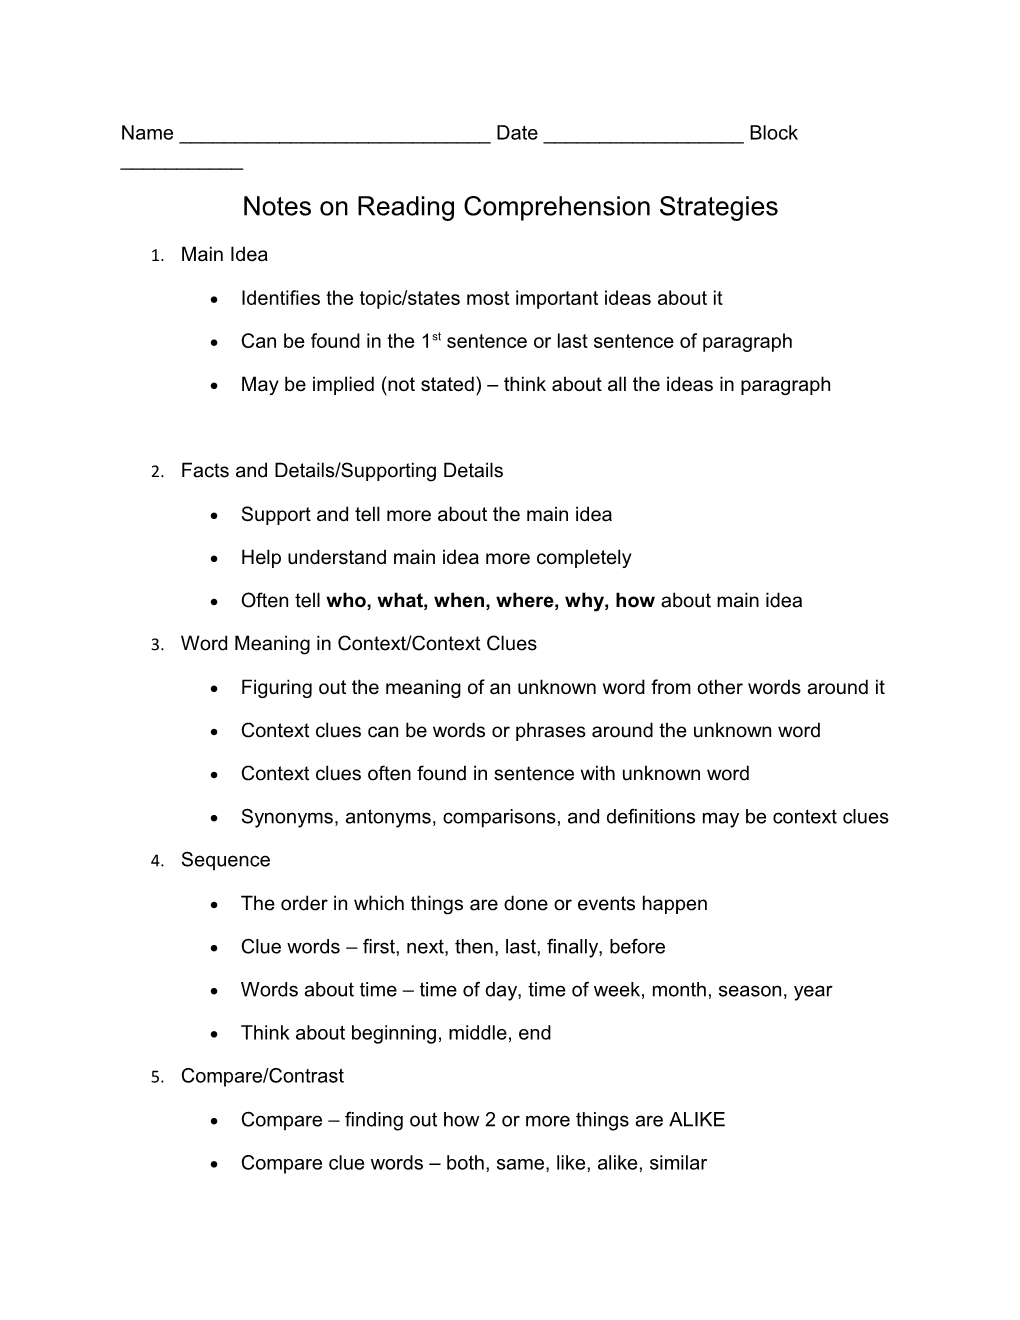 Notes on Reading Comprehension Strategies